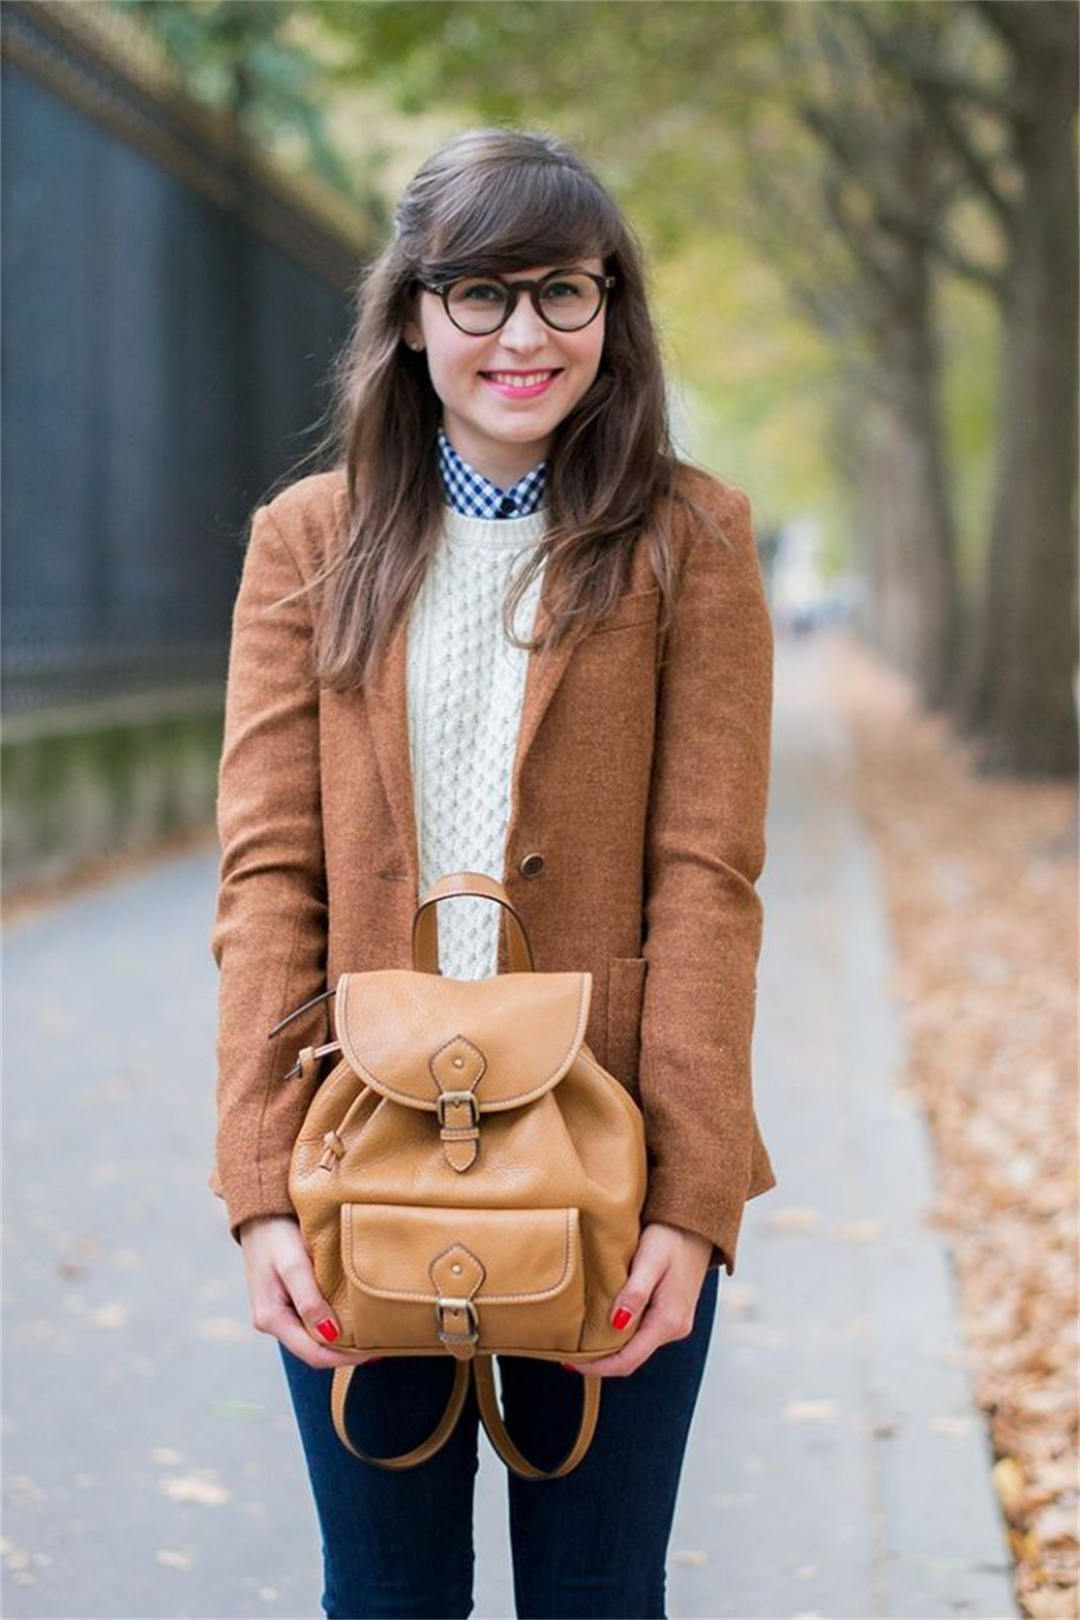 Geek Chic Fashion Style 30 Geek Chic Outfit Ideas For Women Indian Sareeshop 